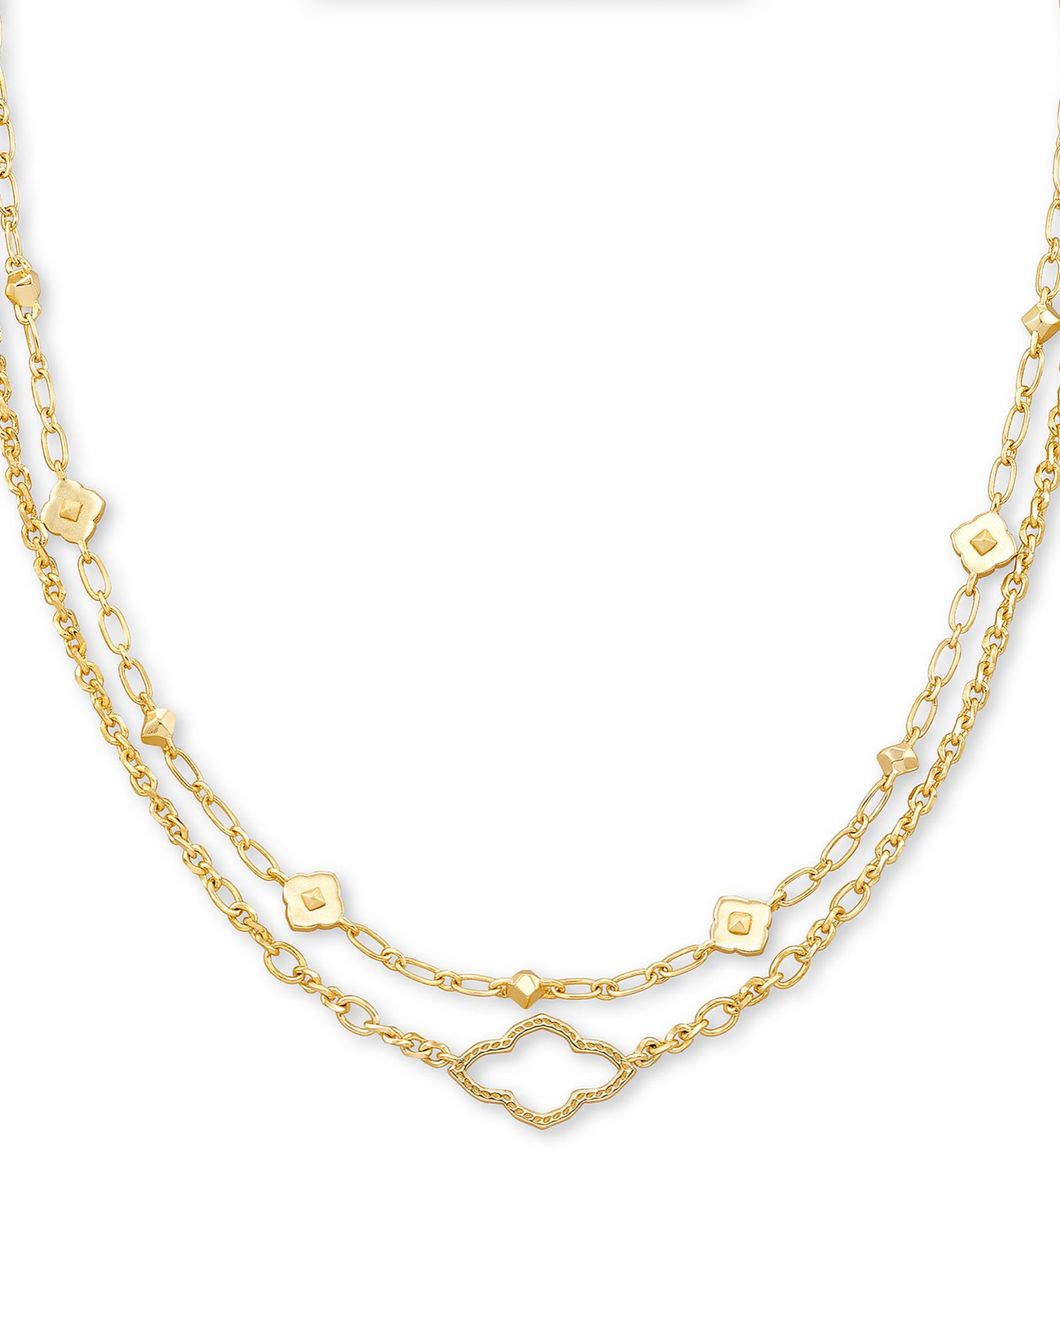 Abbie Multi Strand Necklace in Gold by Kendra Scott